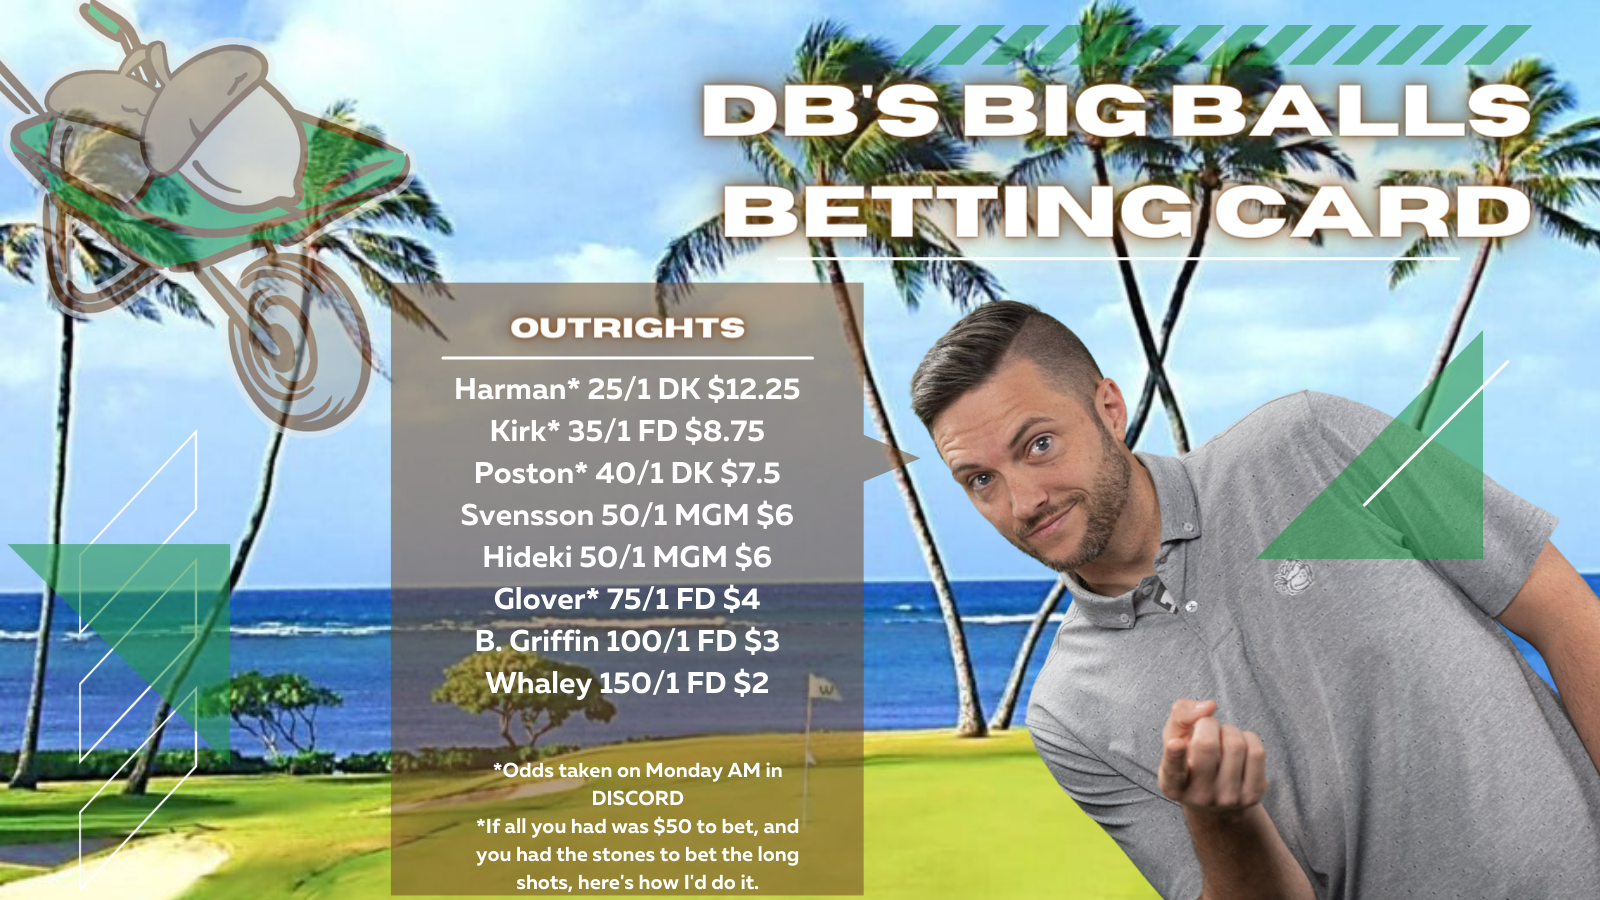 DB's outright betting card for the Sony Open